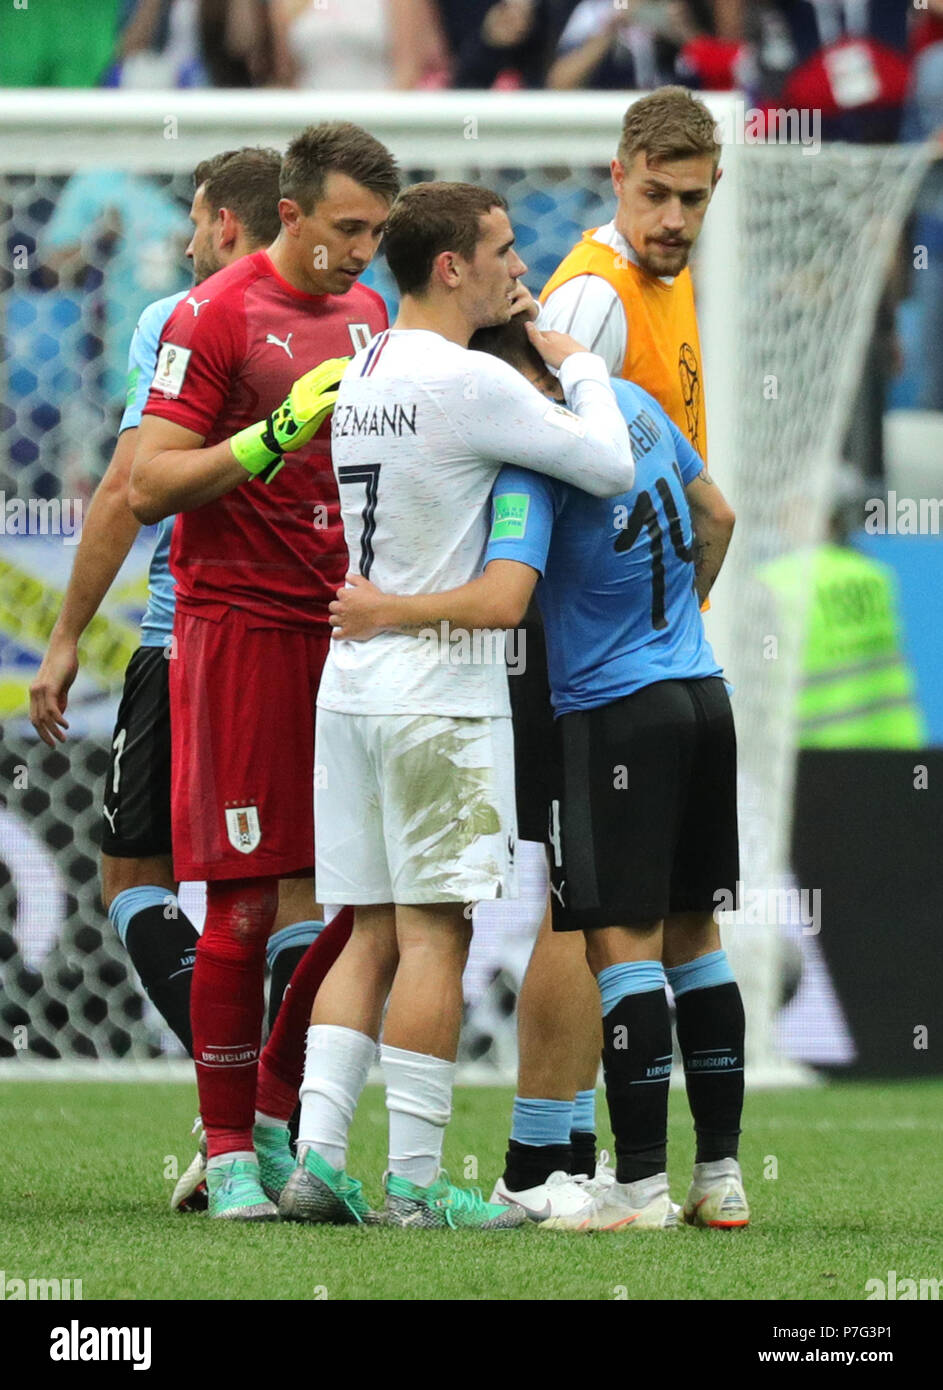 Nizhny Novgorod, Russia. 06th July, 2018. World Cup 2018, Uruguay vs France, Nizhny Novgorod stadium. Lucas Torreira from Uruguay (R) is embraced by Antoine Griezmann (C) from France after the end of the match. Next to them goalkeeper Fernando Muslera of Uruguay. Credit: Christian Charisius/dpa/Alamy Live News Stock Photo